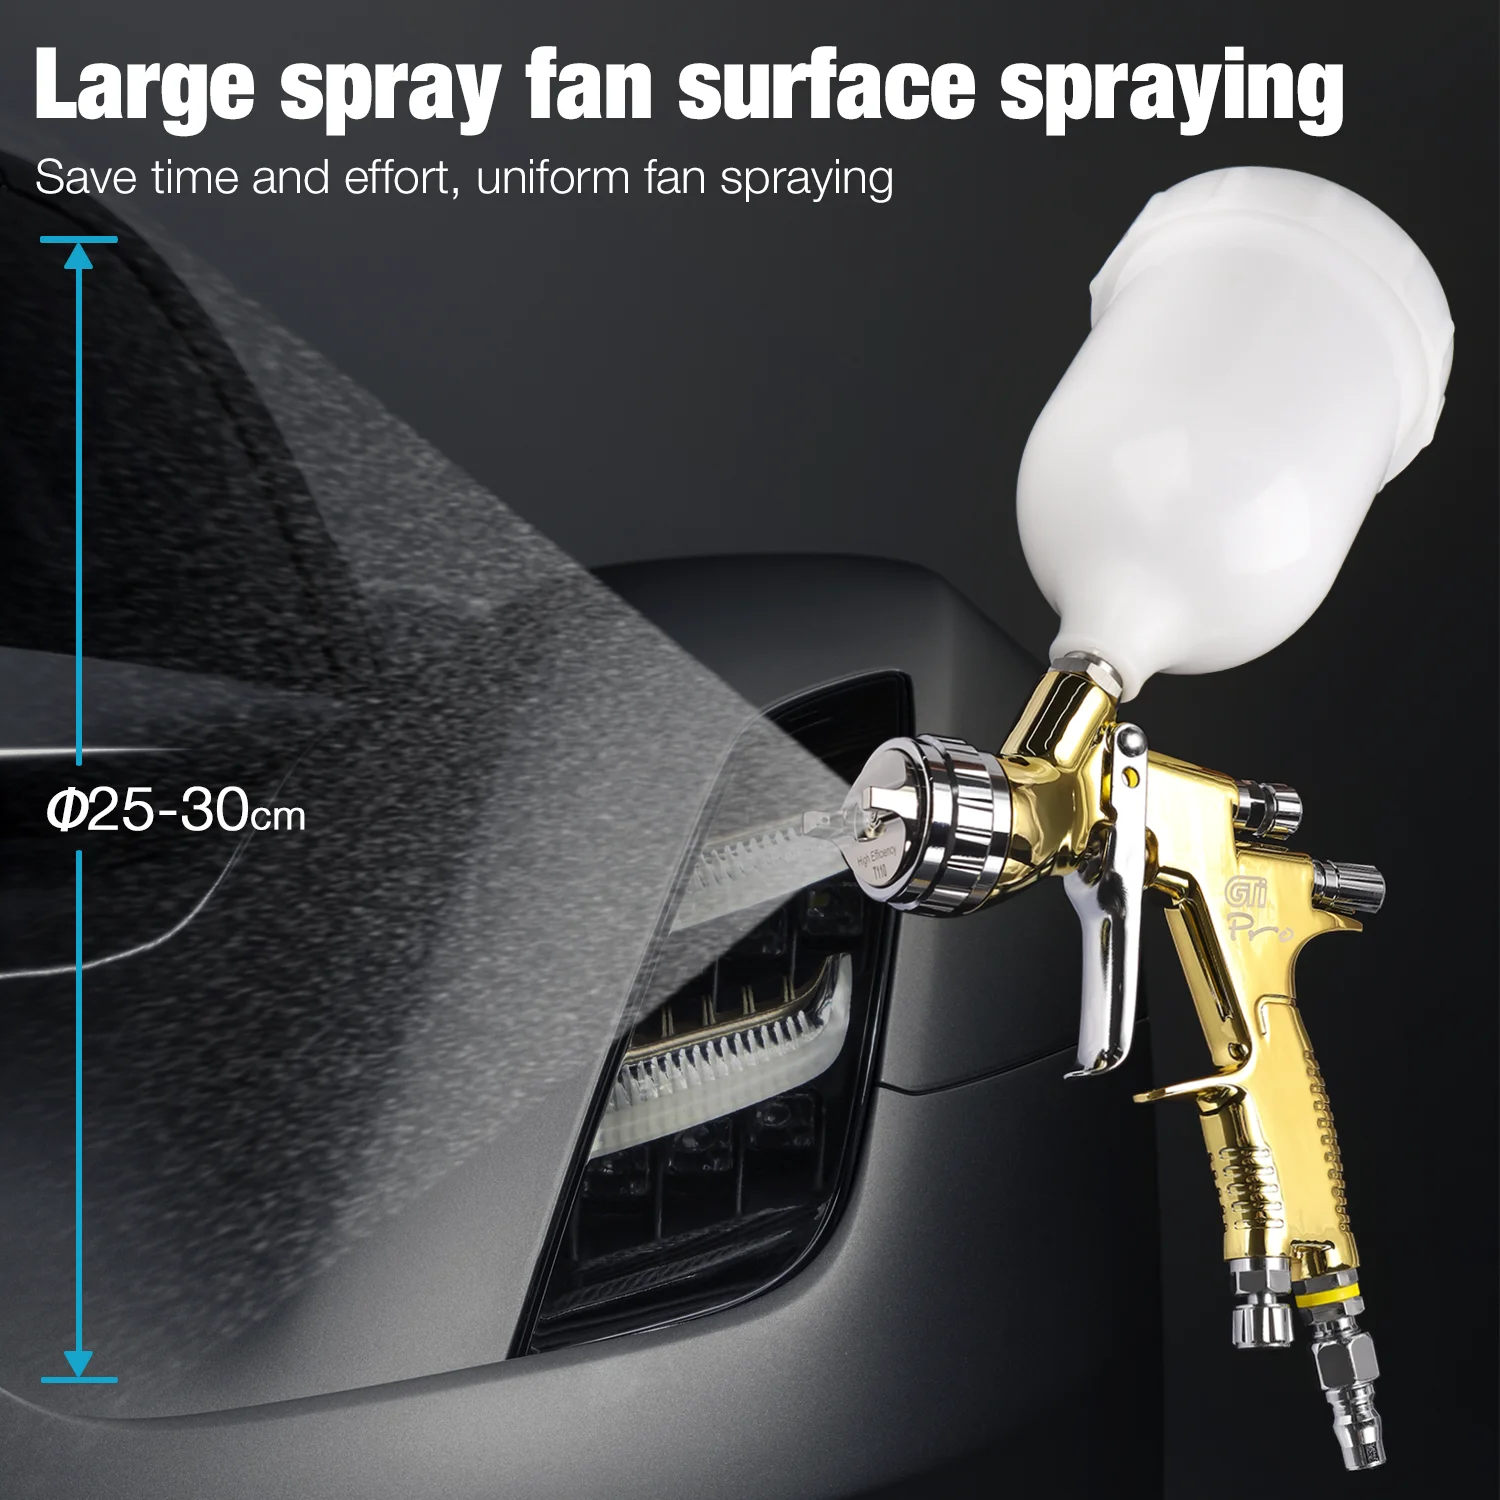 New High Quality Spray  GTI Pro 1.m Nozzle Painting  High Atomization Paint  Wat - £151.41 GBP